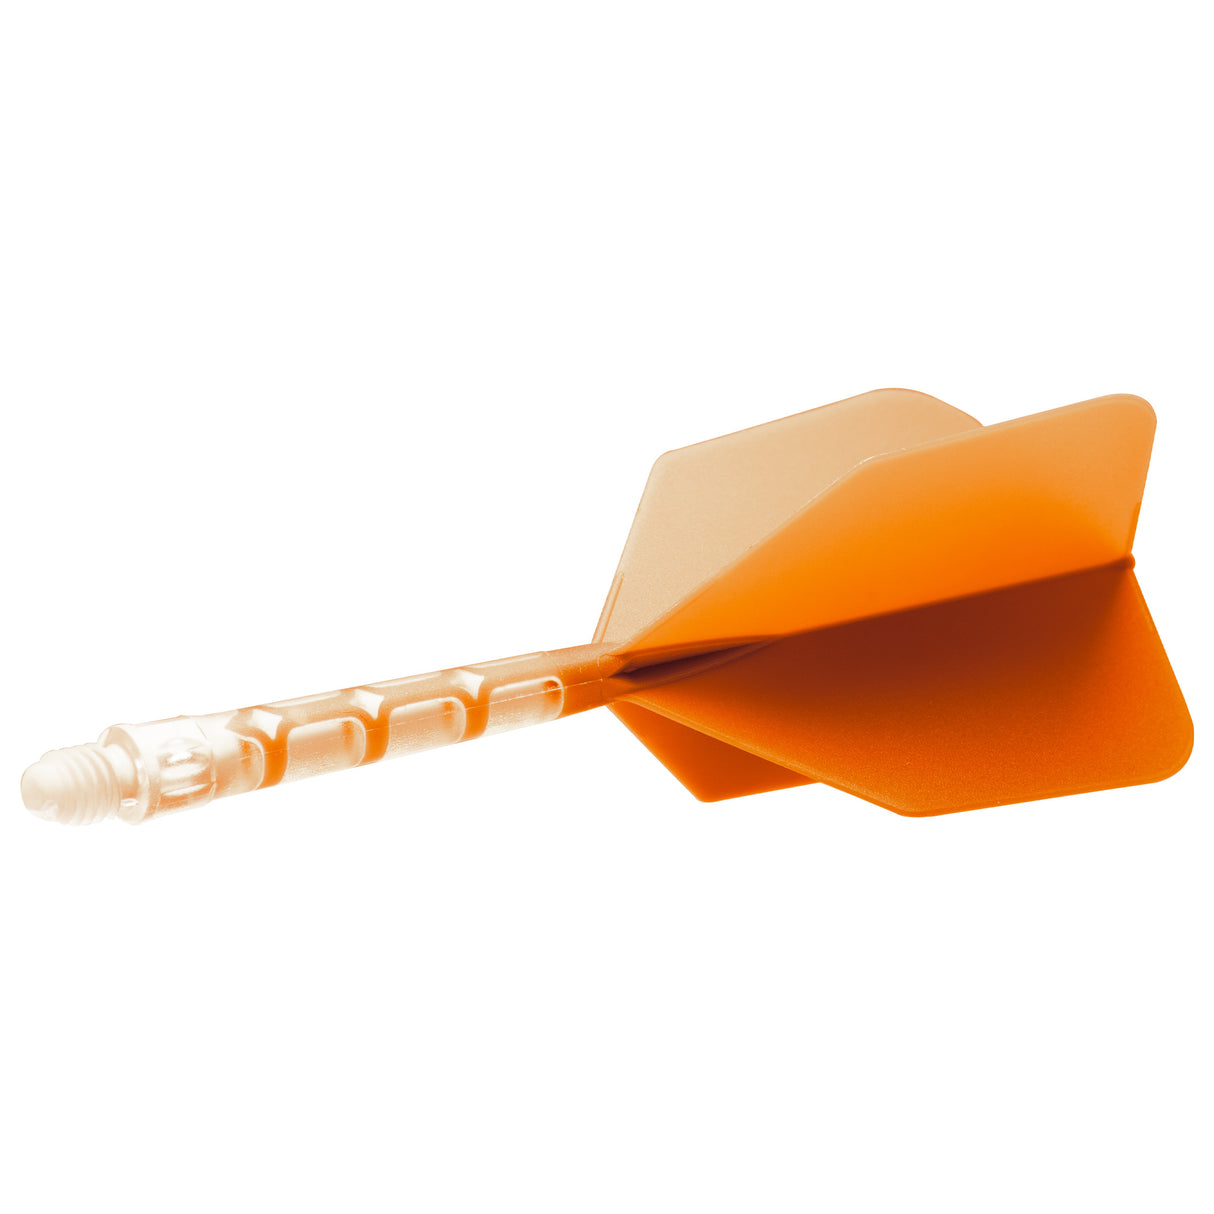 *Cuesoul Rost T19 Integrated Dart Shaft and Flights - Big Wing - Clear with Orange Flight